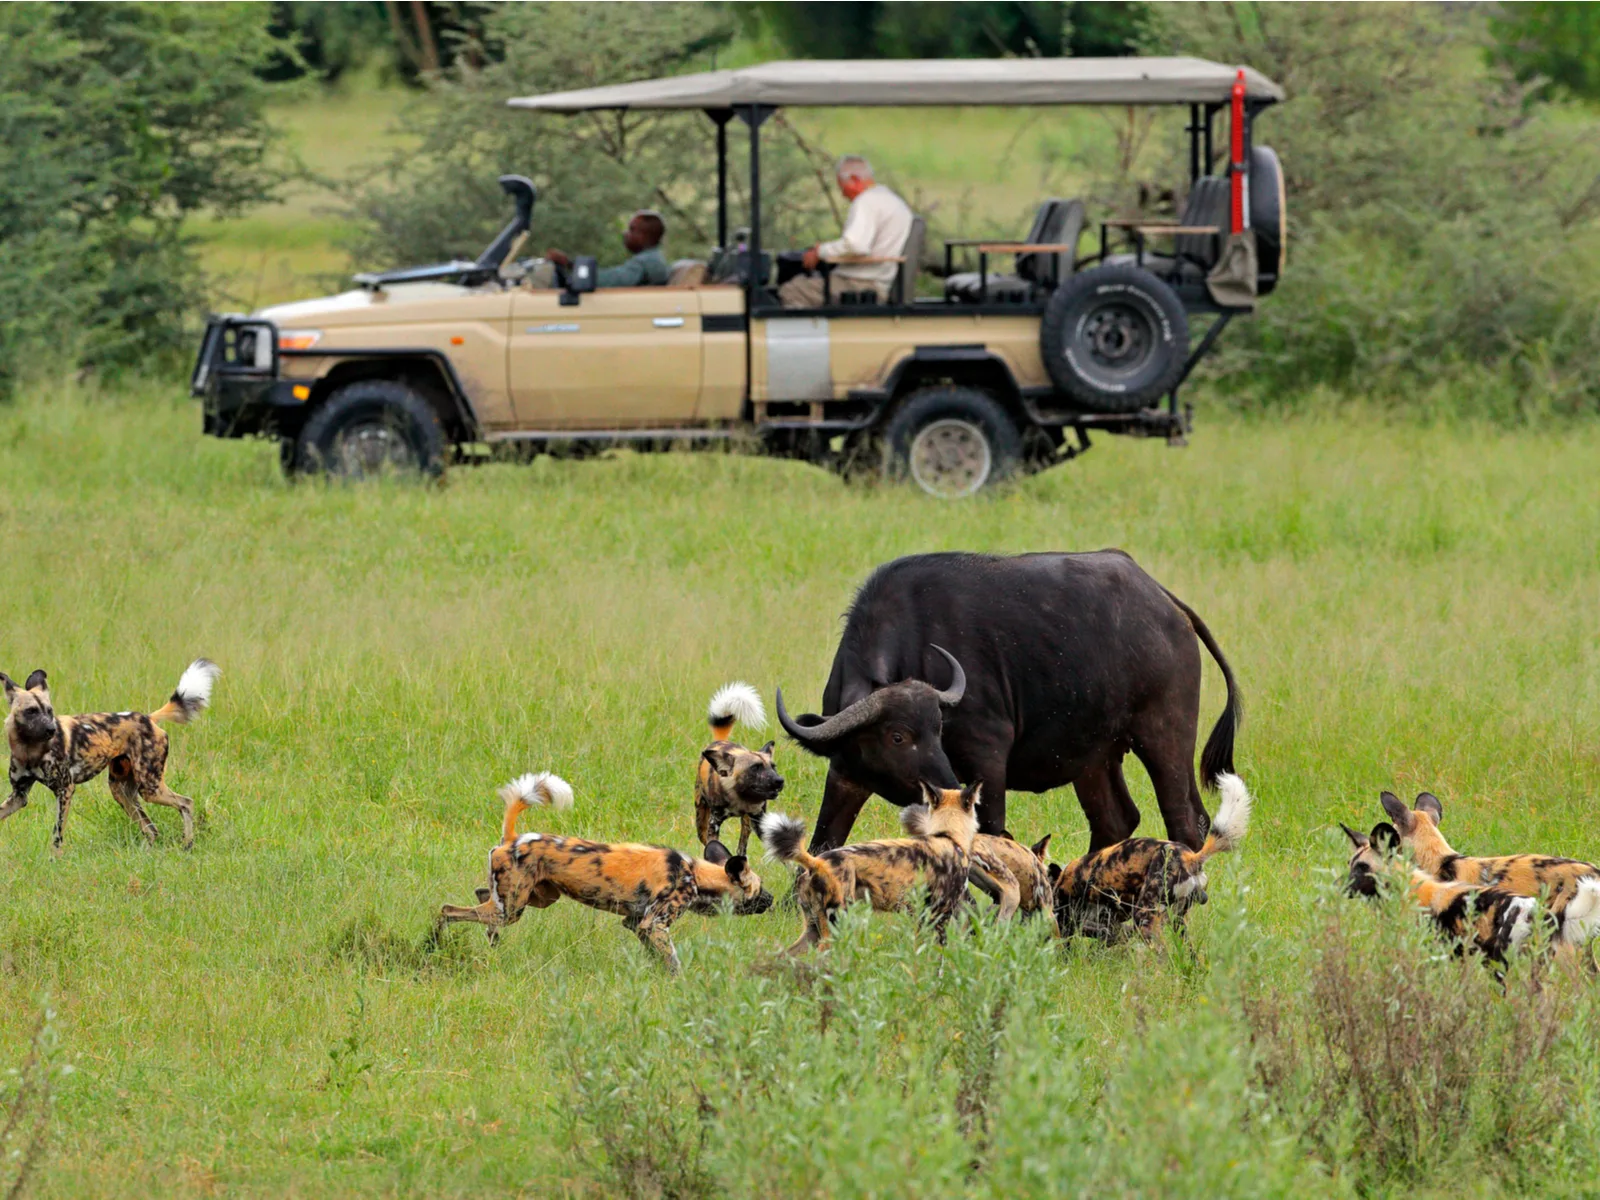 Moremi Game Reserve, one of the best safaris in Africa, featuring buffalo and calves